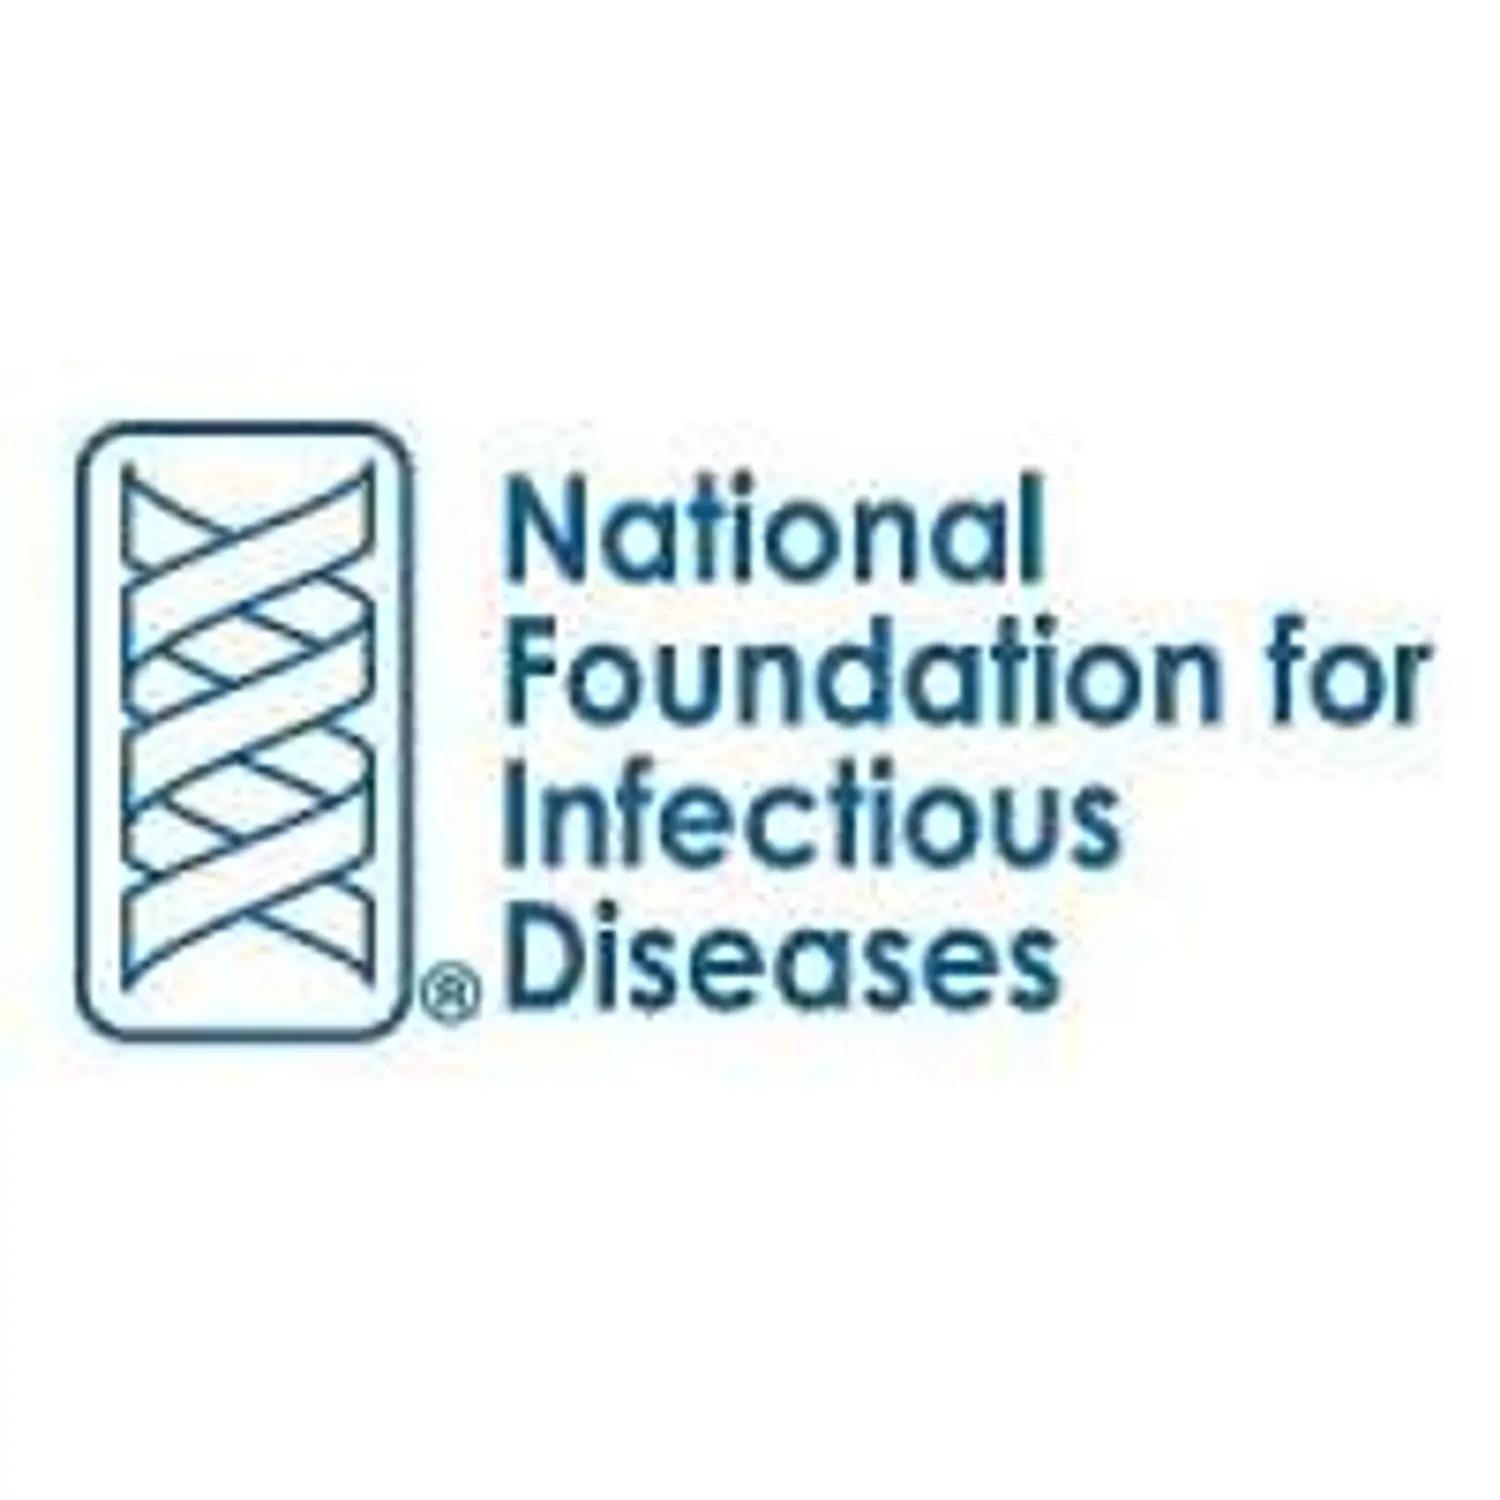 National Foundation for Infectious Diseases (NFID)